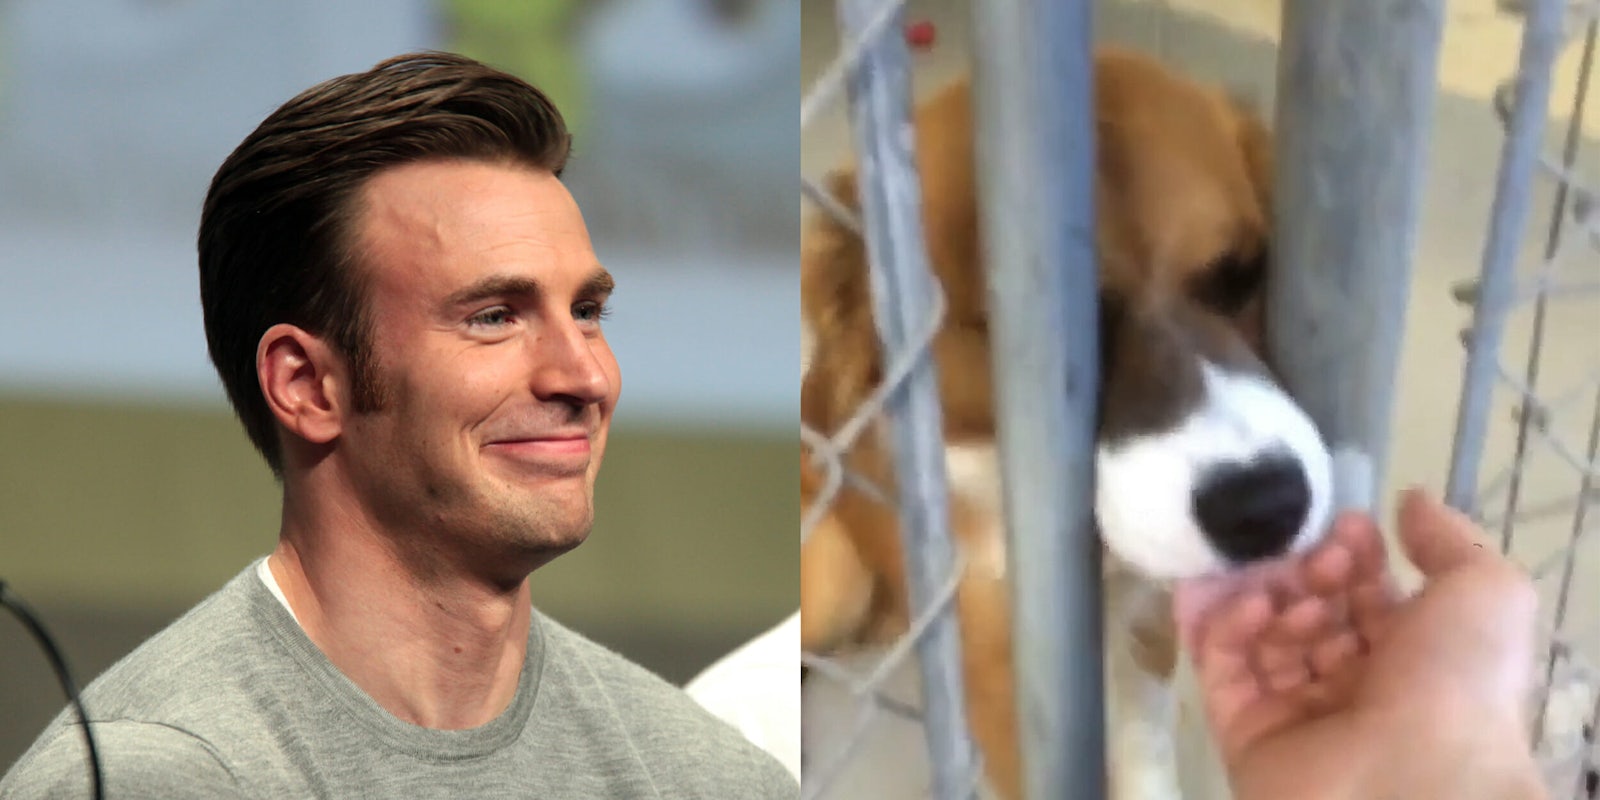 Chris Evans at the dog shelter petting a dog